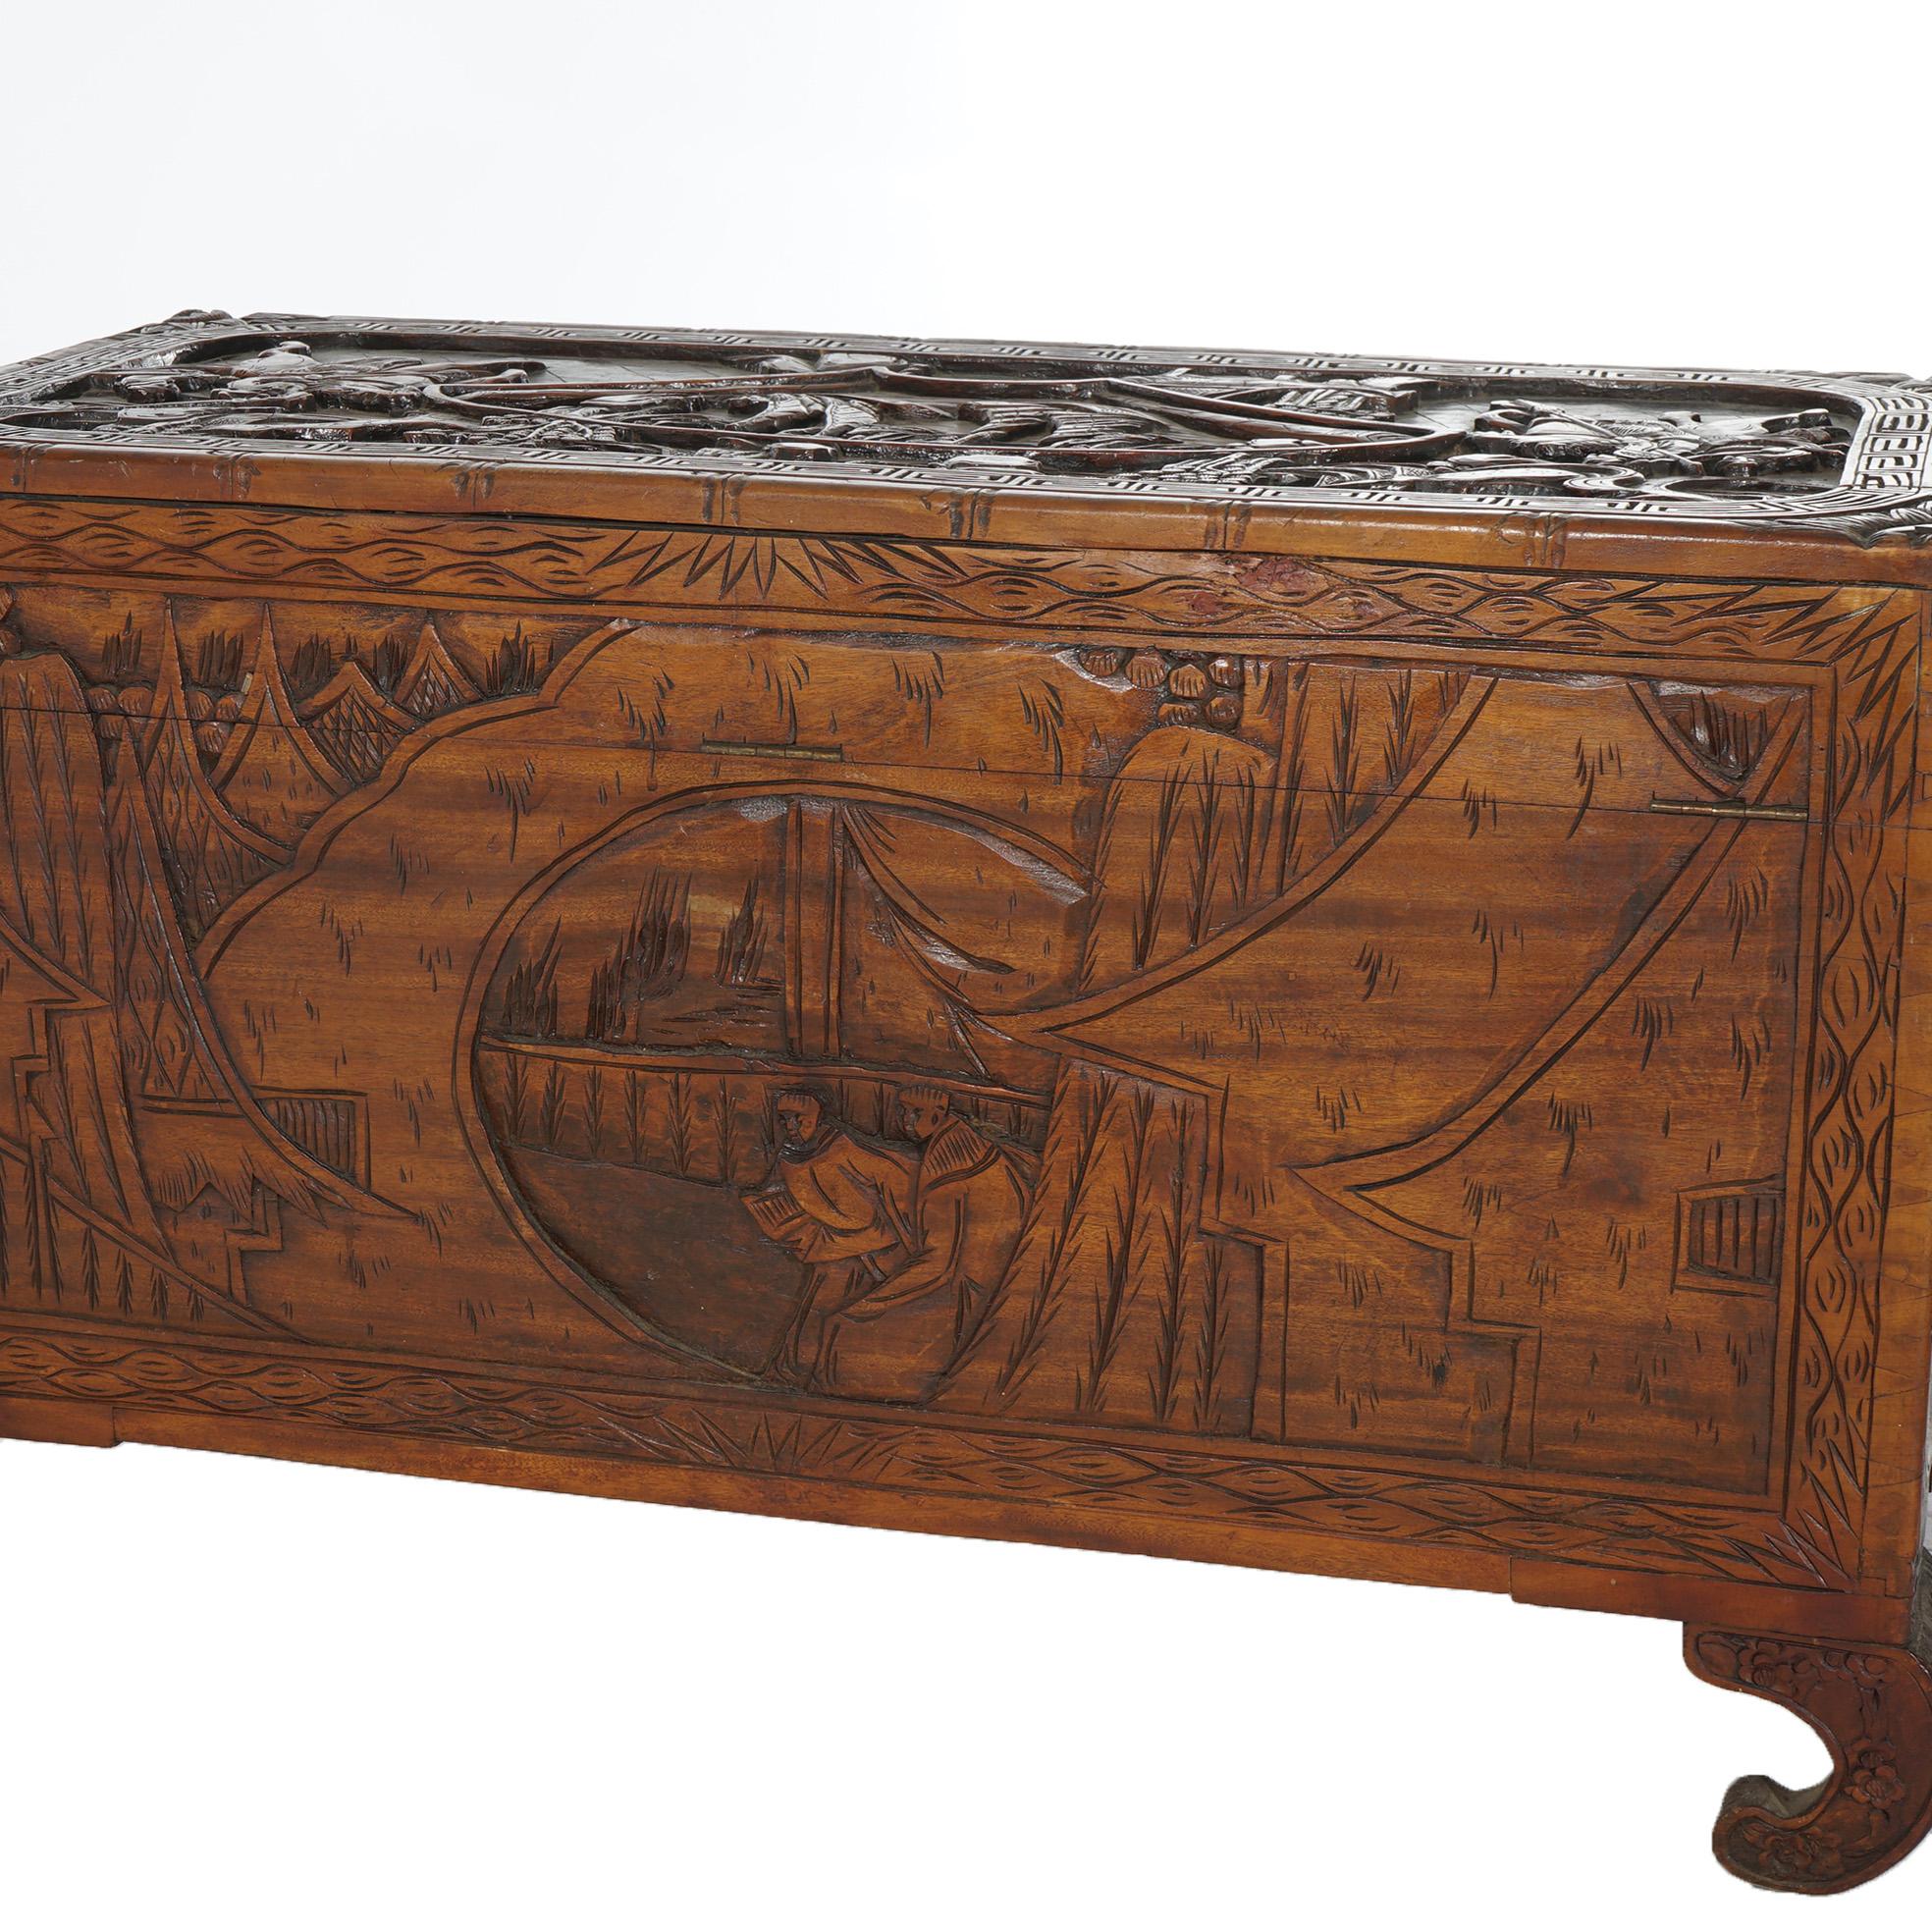 Antique Chinese Carved Hardwood Chest with Figures & Scenes in Relief C1920 For Sale 11